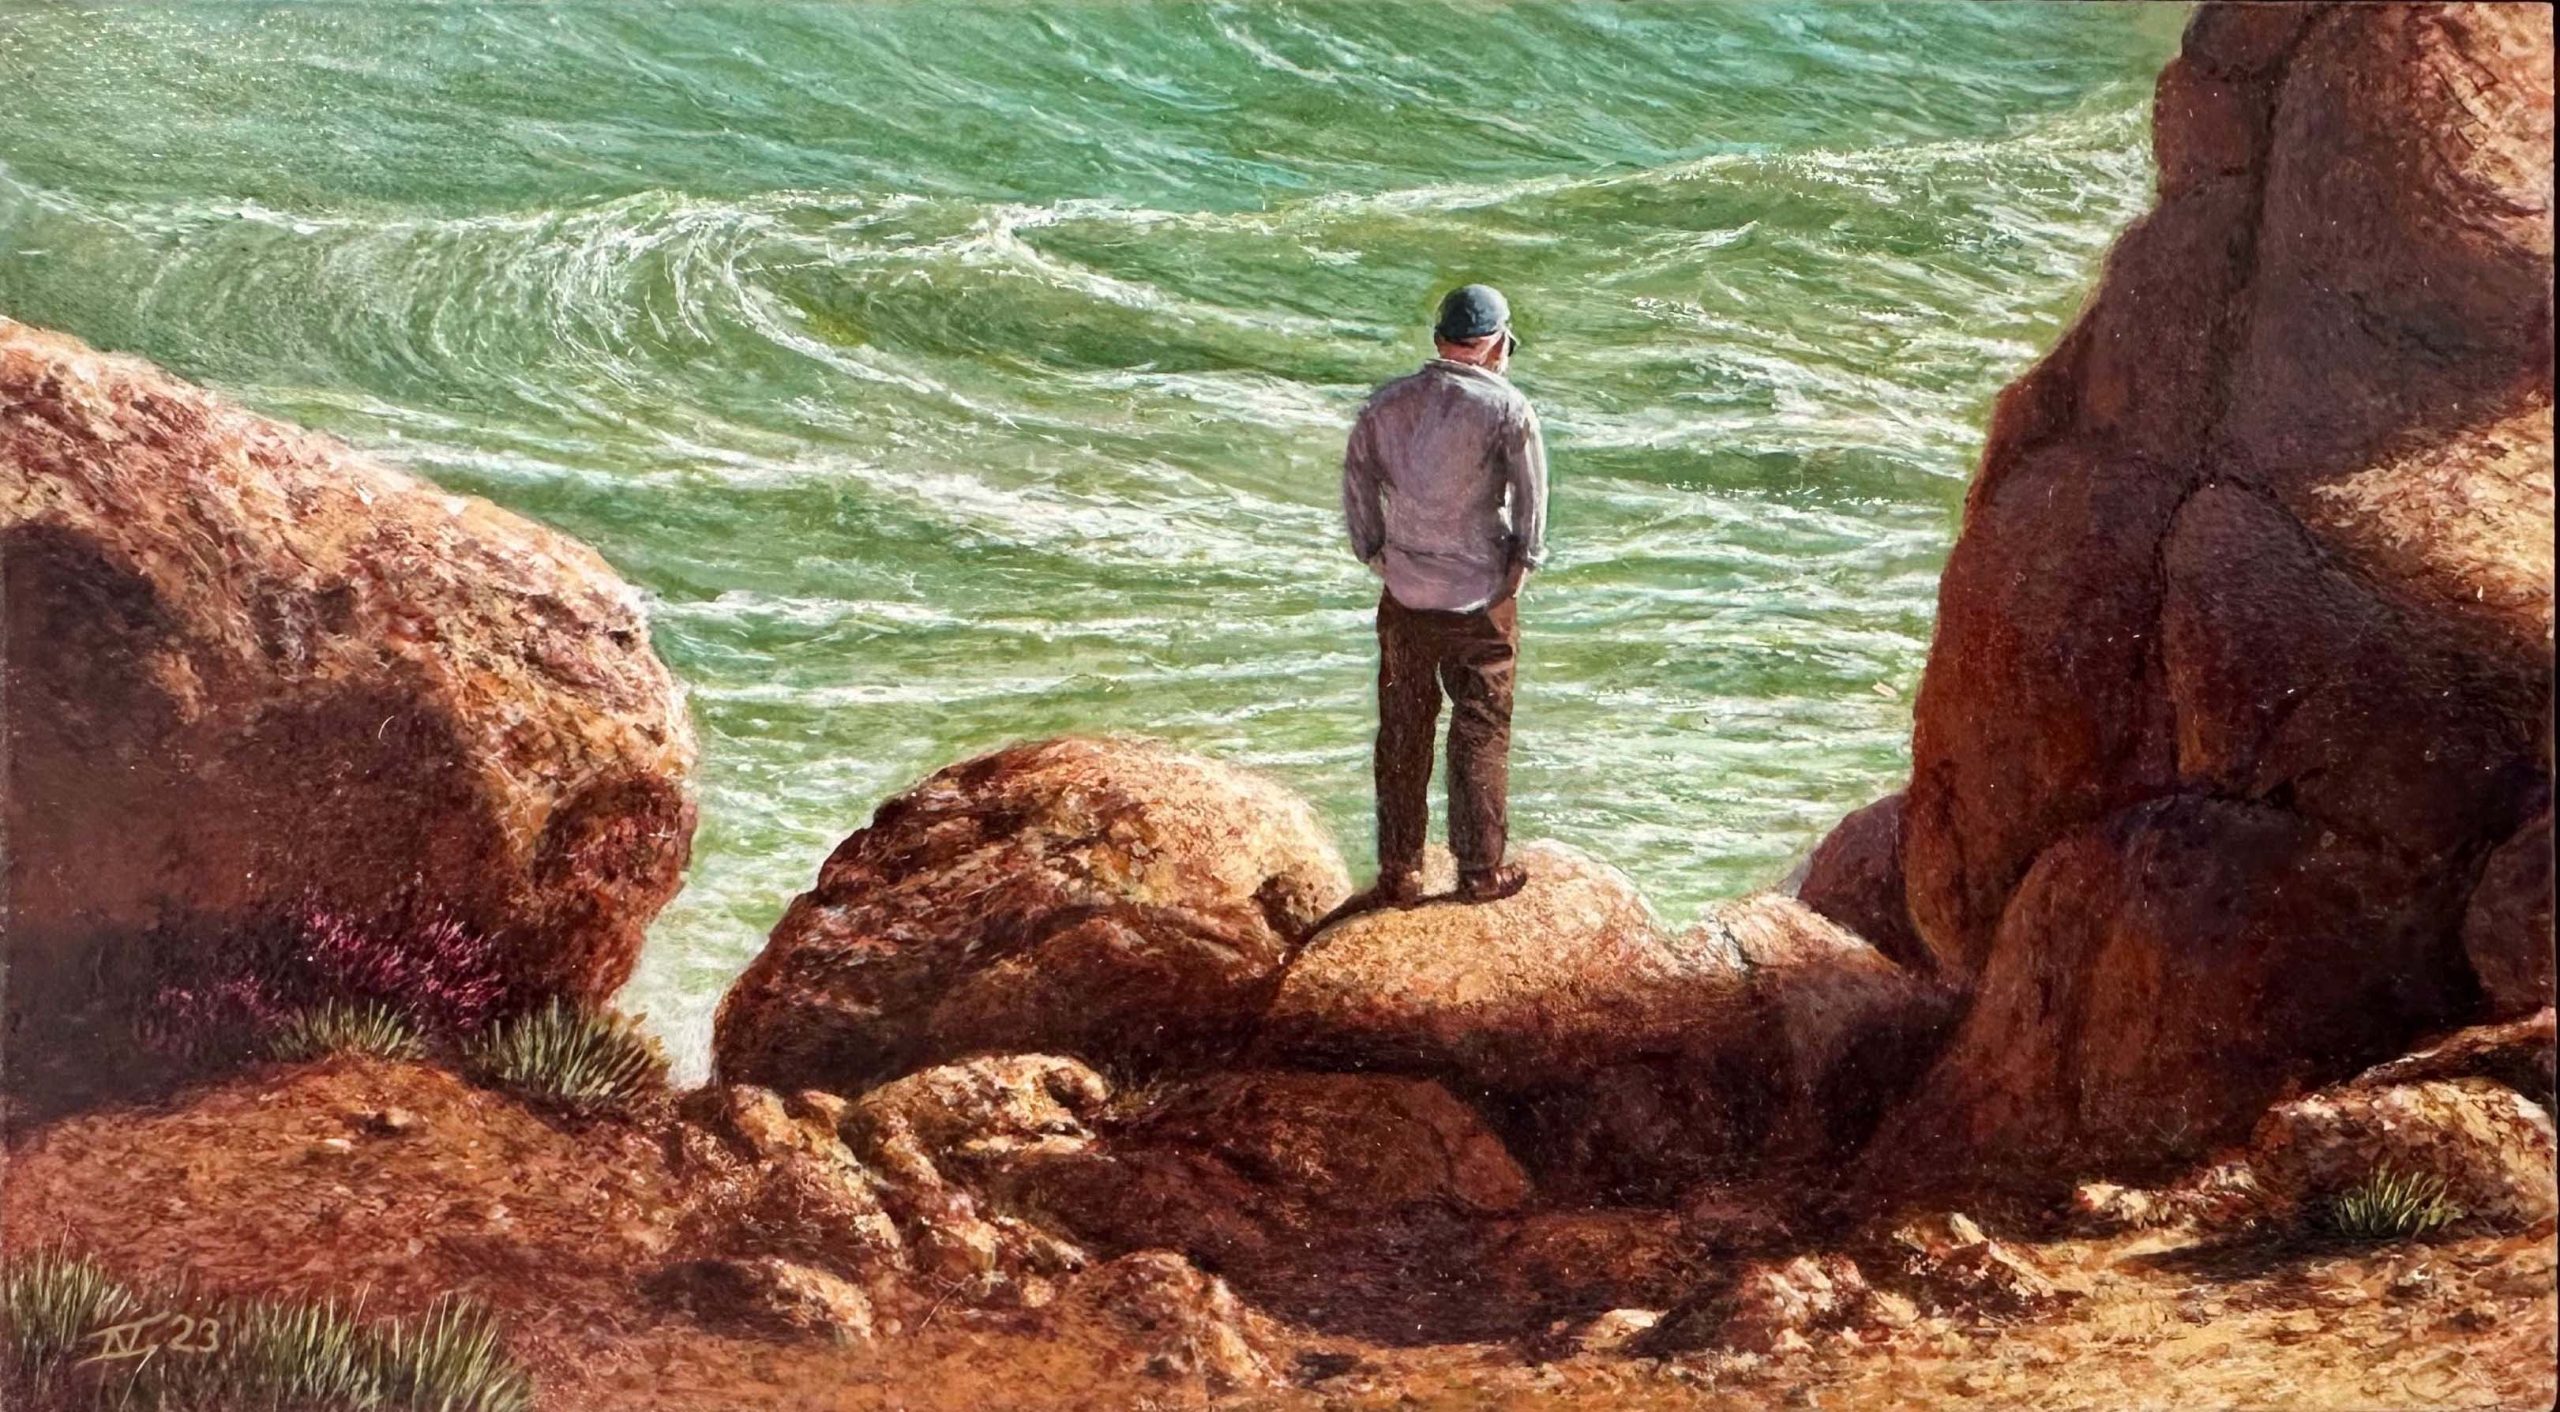 Nick Stathopoulos 'On the Rocks' acrylic and oil on board 12.5 x 23cm $2,500